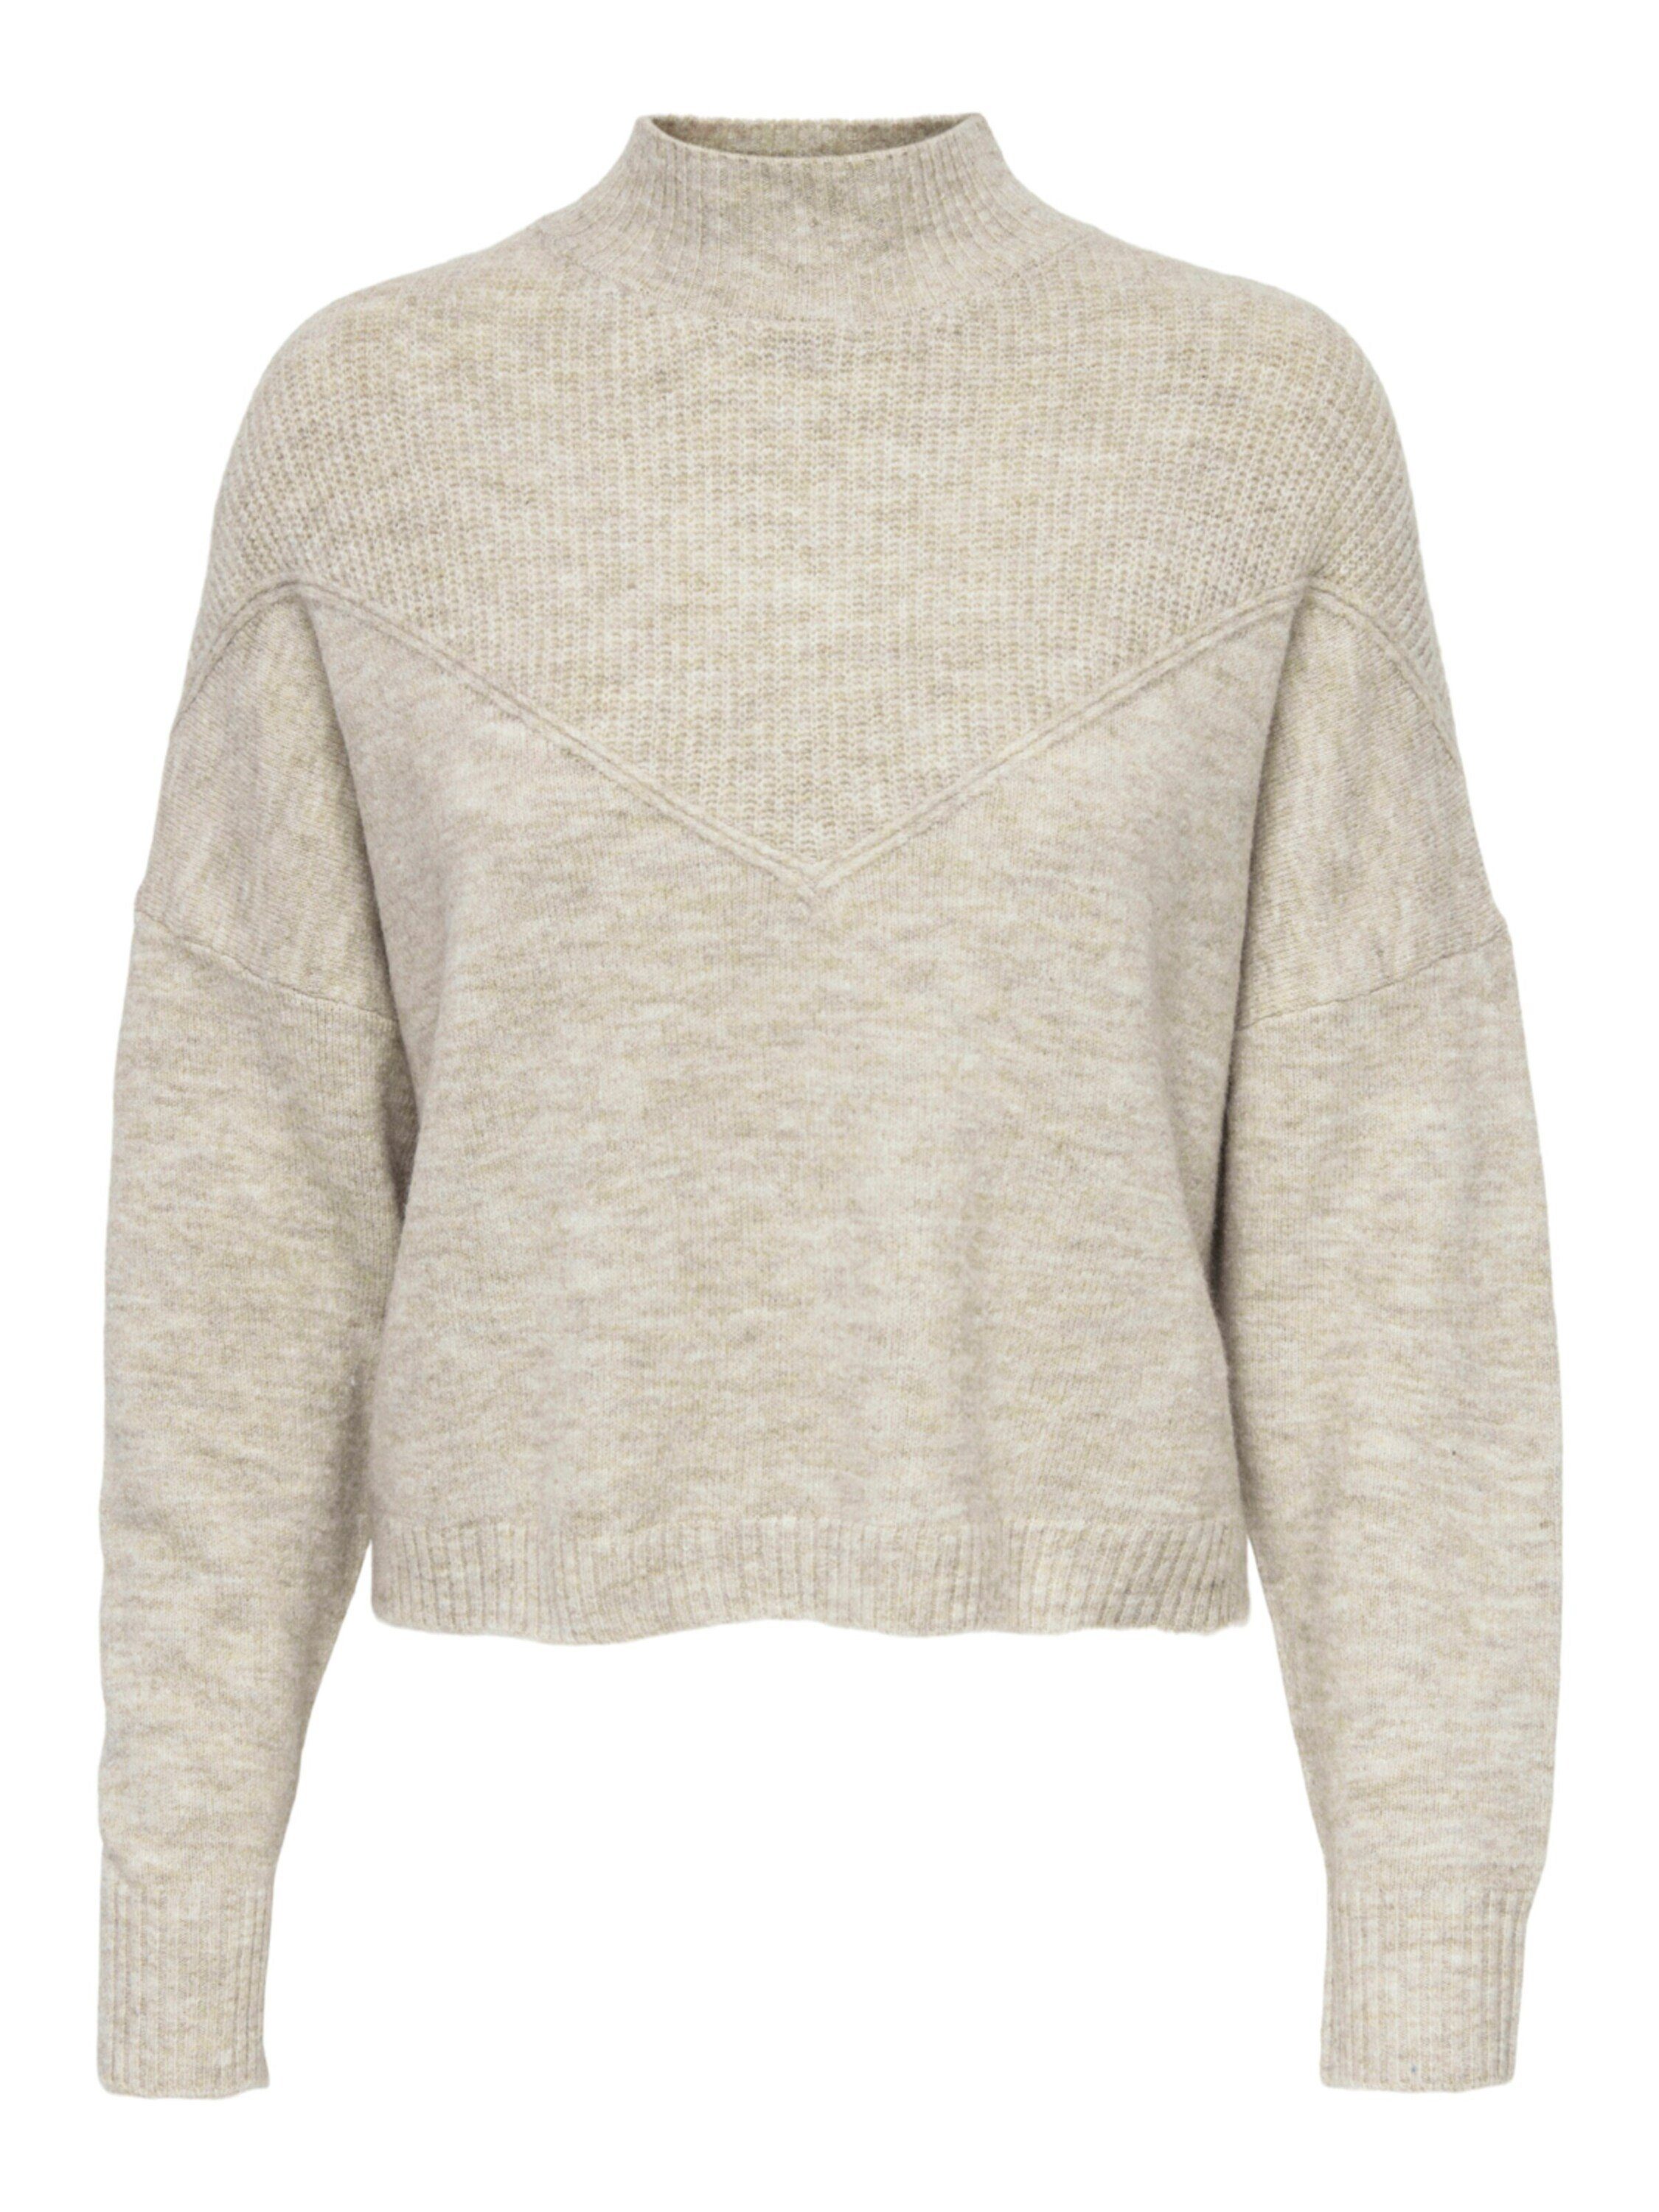 Pumice Stone Plain/ohne Strickpullover ONLY (1-tlg) Details